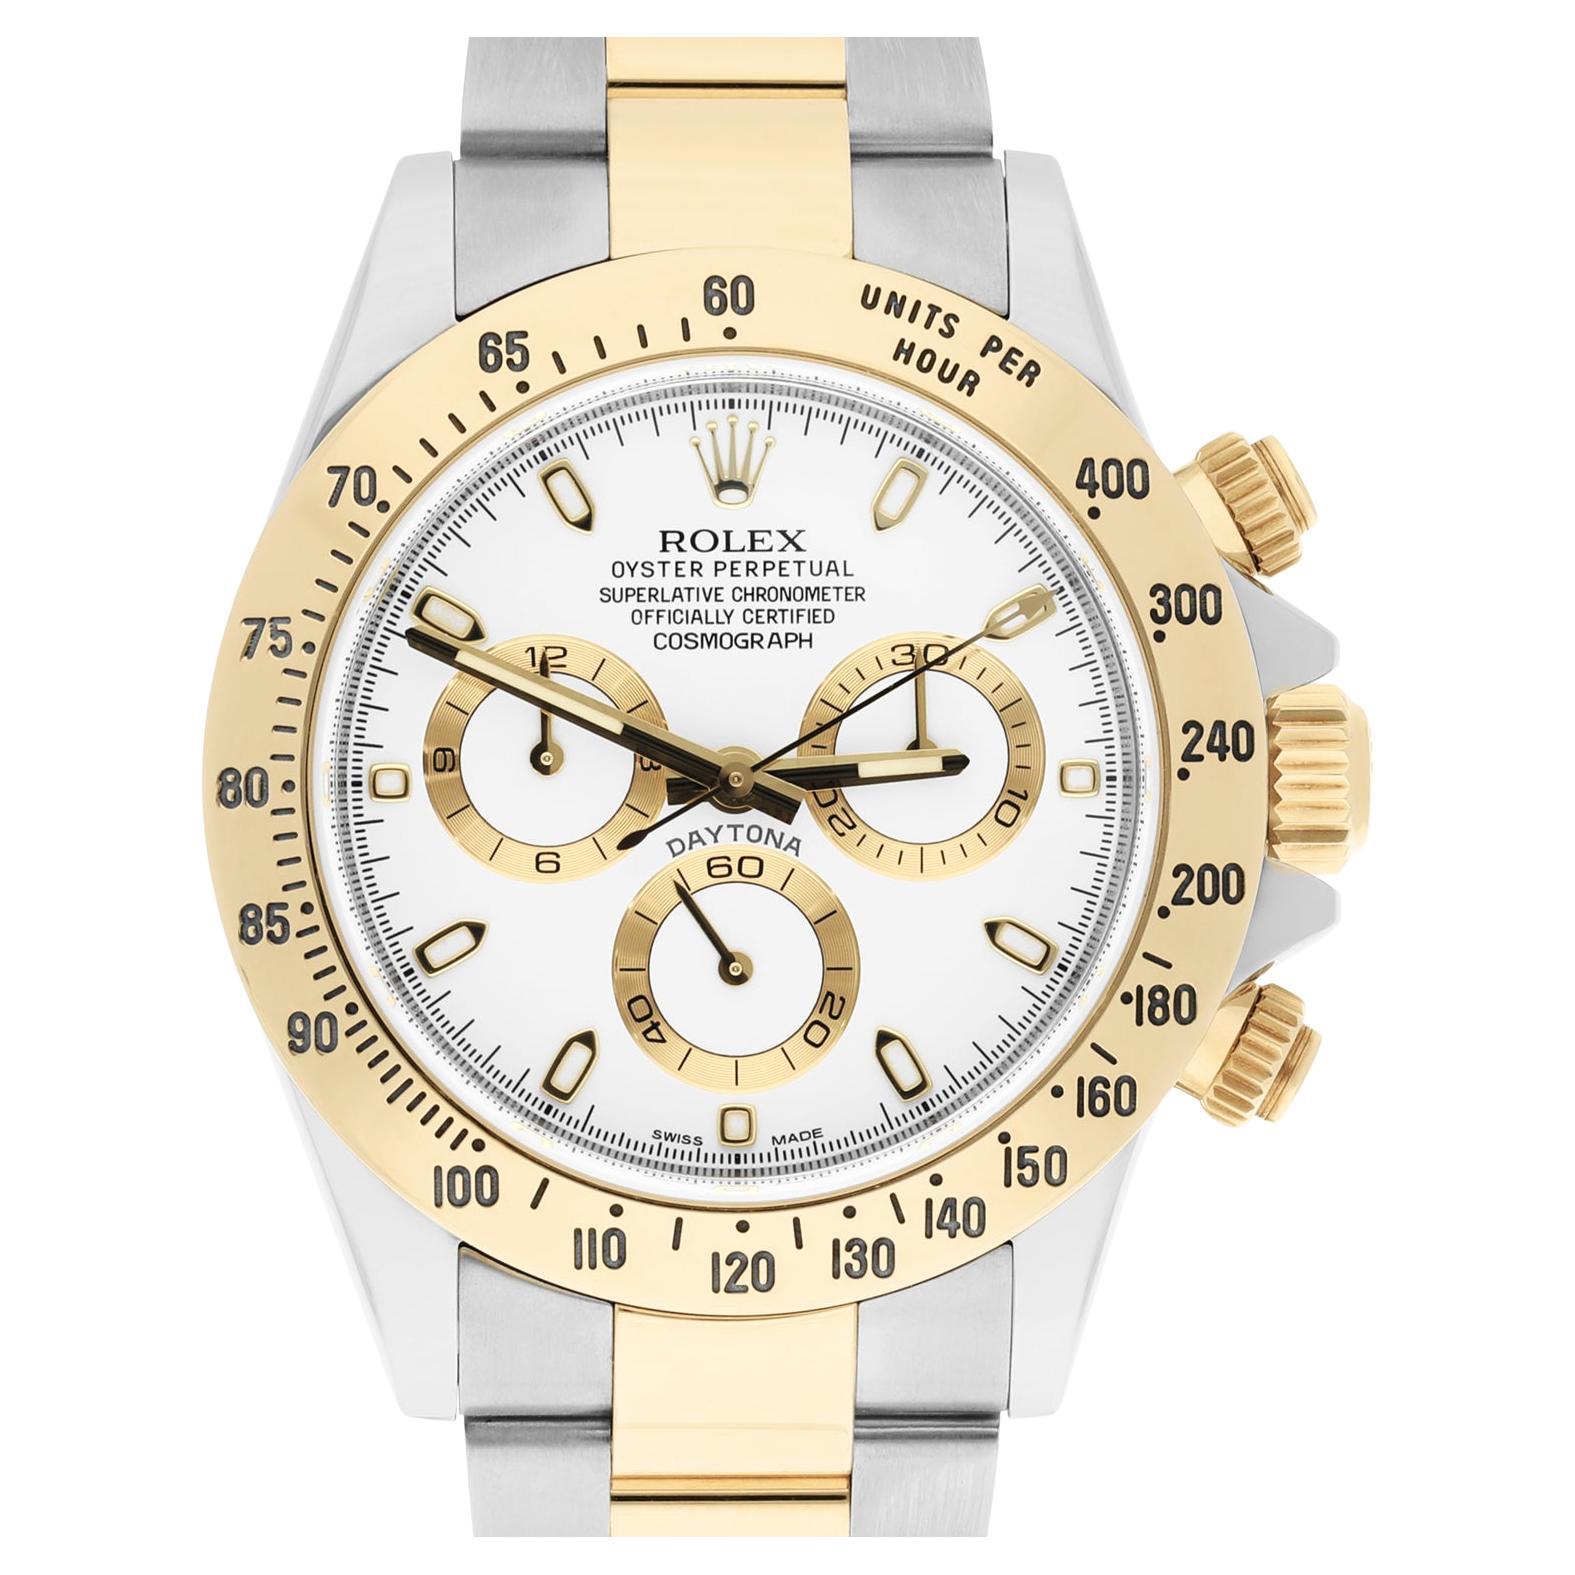 Rolex Daytona Stainless Steel Yellow Gold White Dial Mens Watch 116523 Complete